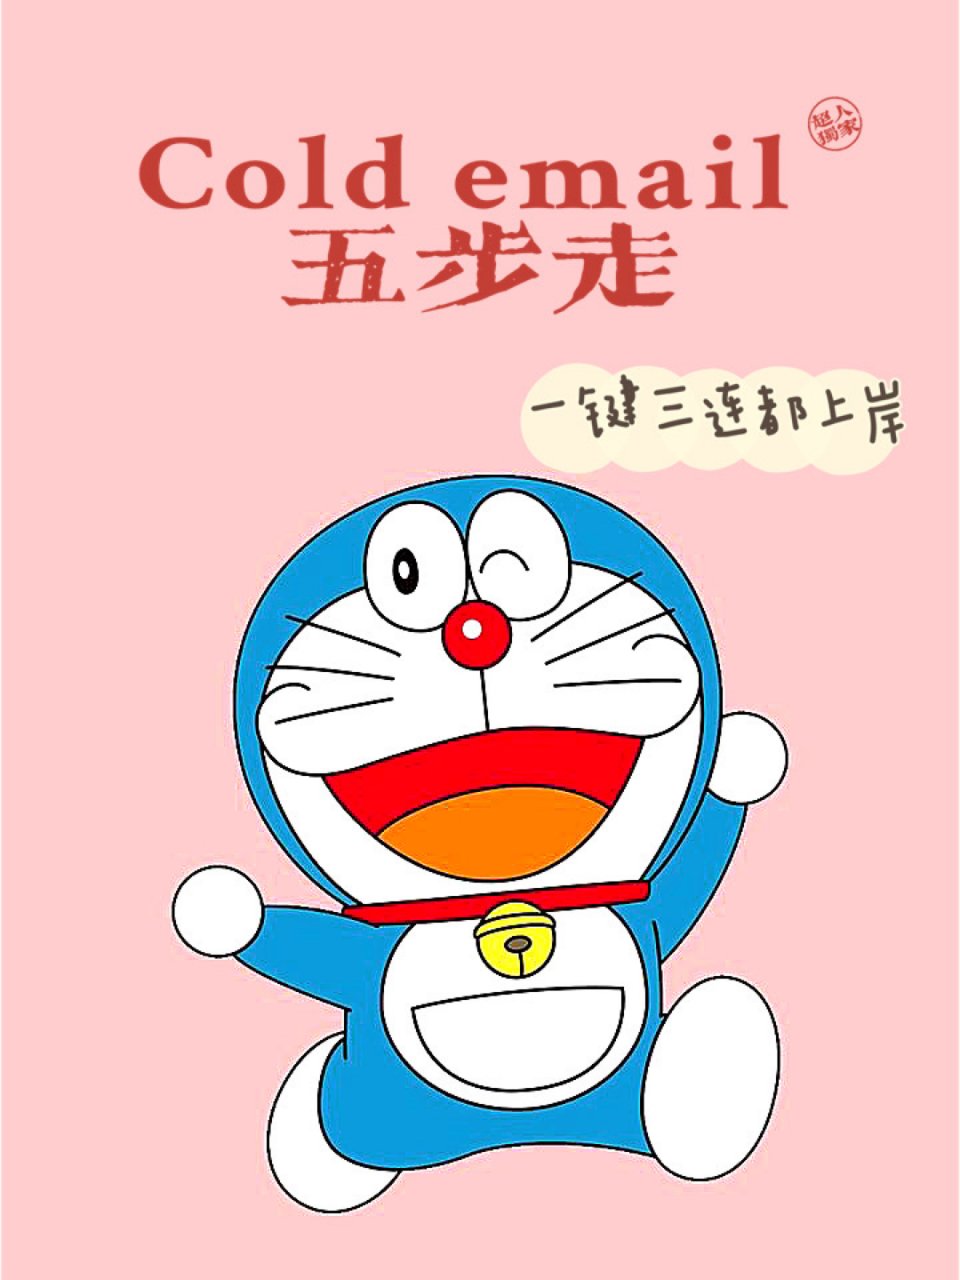 Cold Email超人指南助你上岸⛽️...